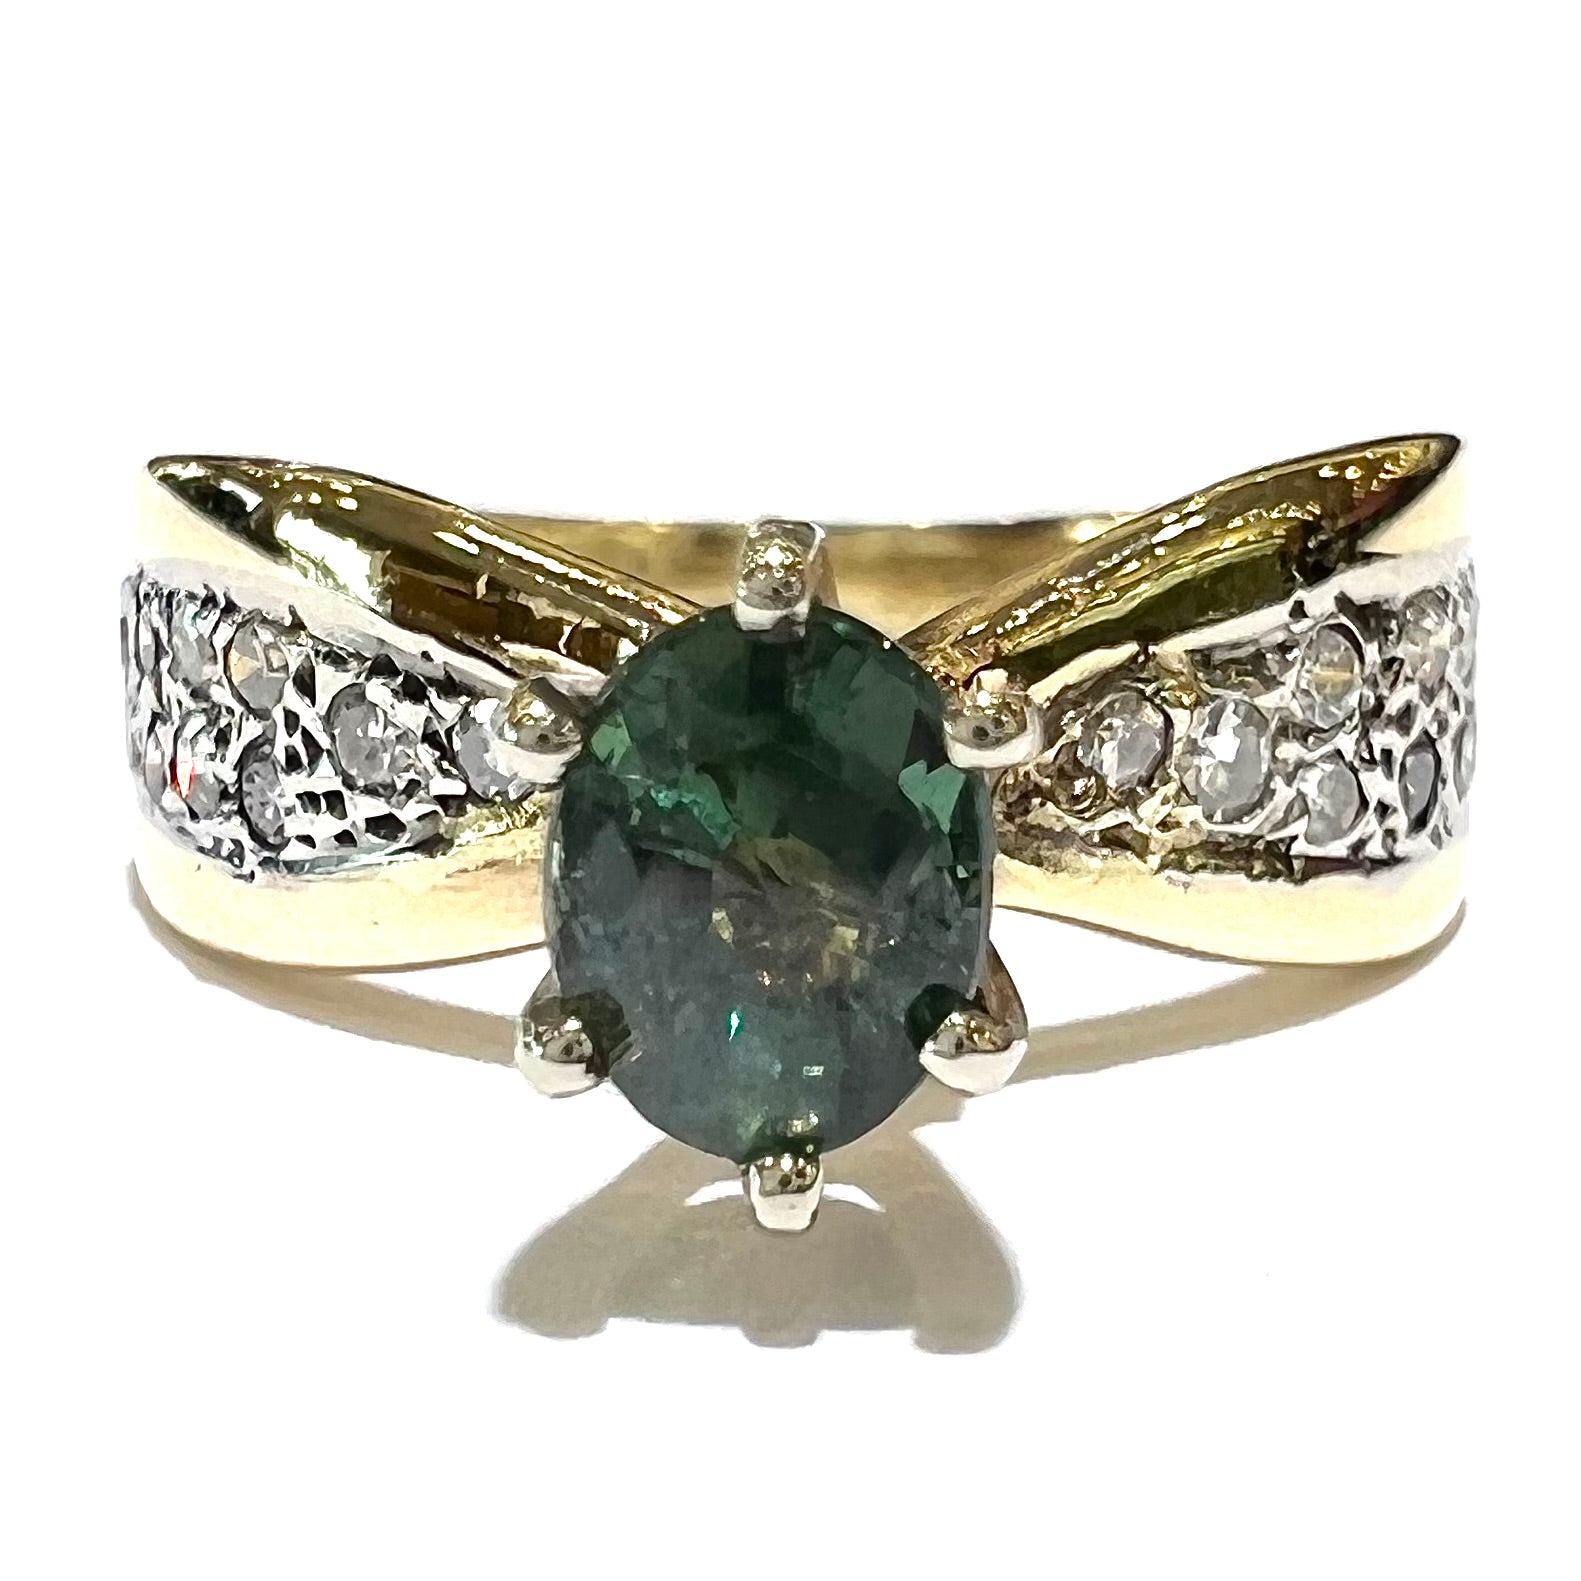 Natural alexandrite set in six prong yellow gold setting with pave diamonds.